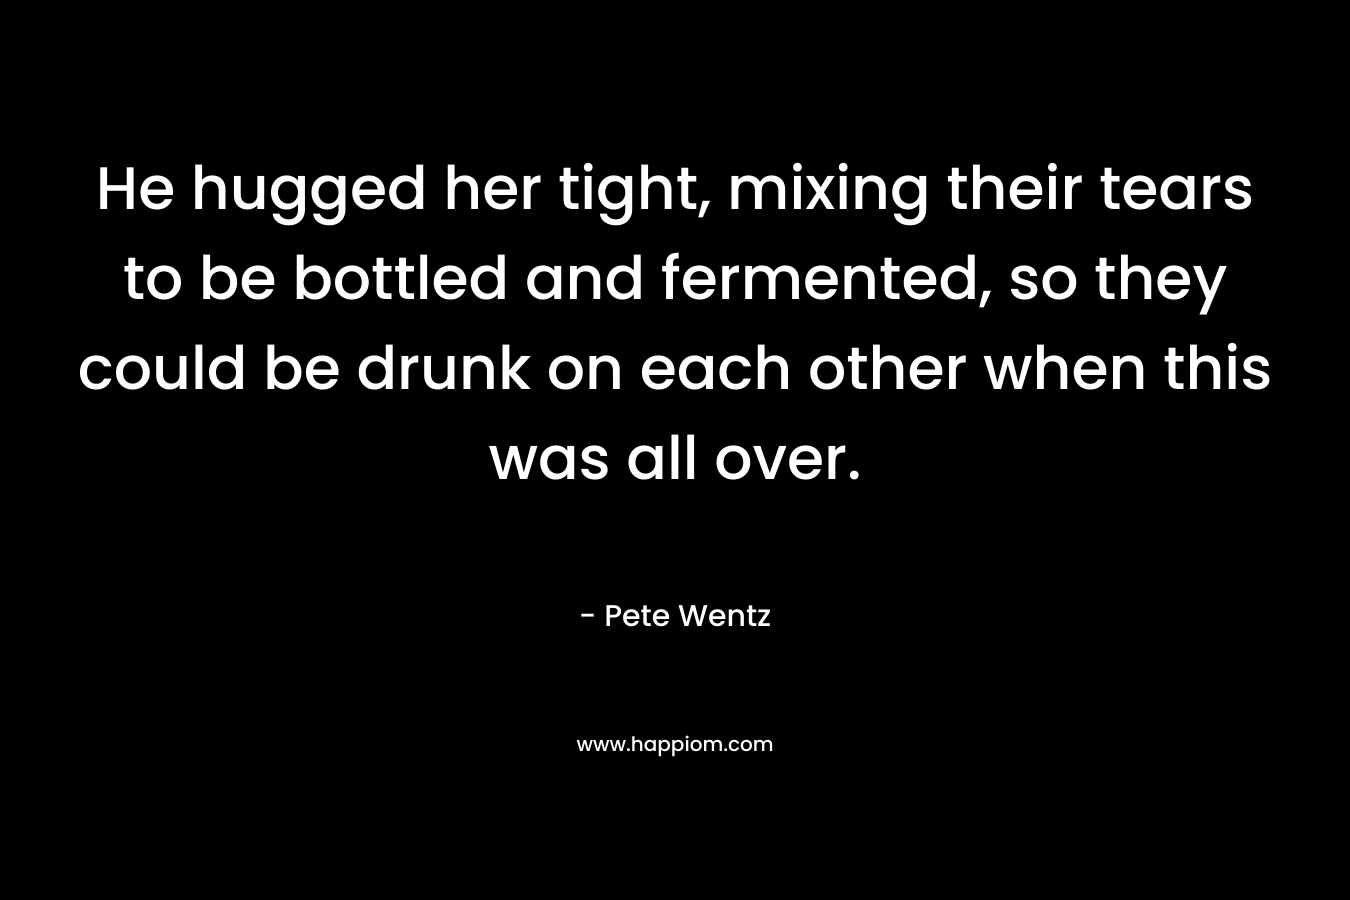 He hugged her tight, mixing their tears to be bottled and fermented, so they could be drunk on each other when this was all over. – Pete Wentz